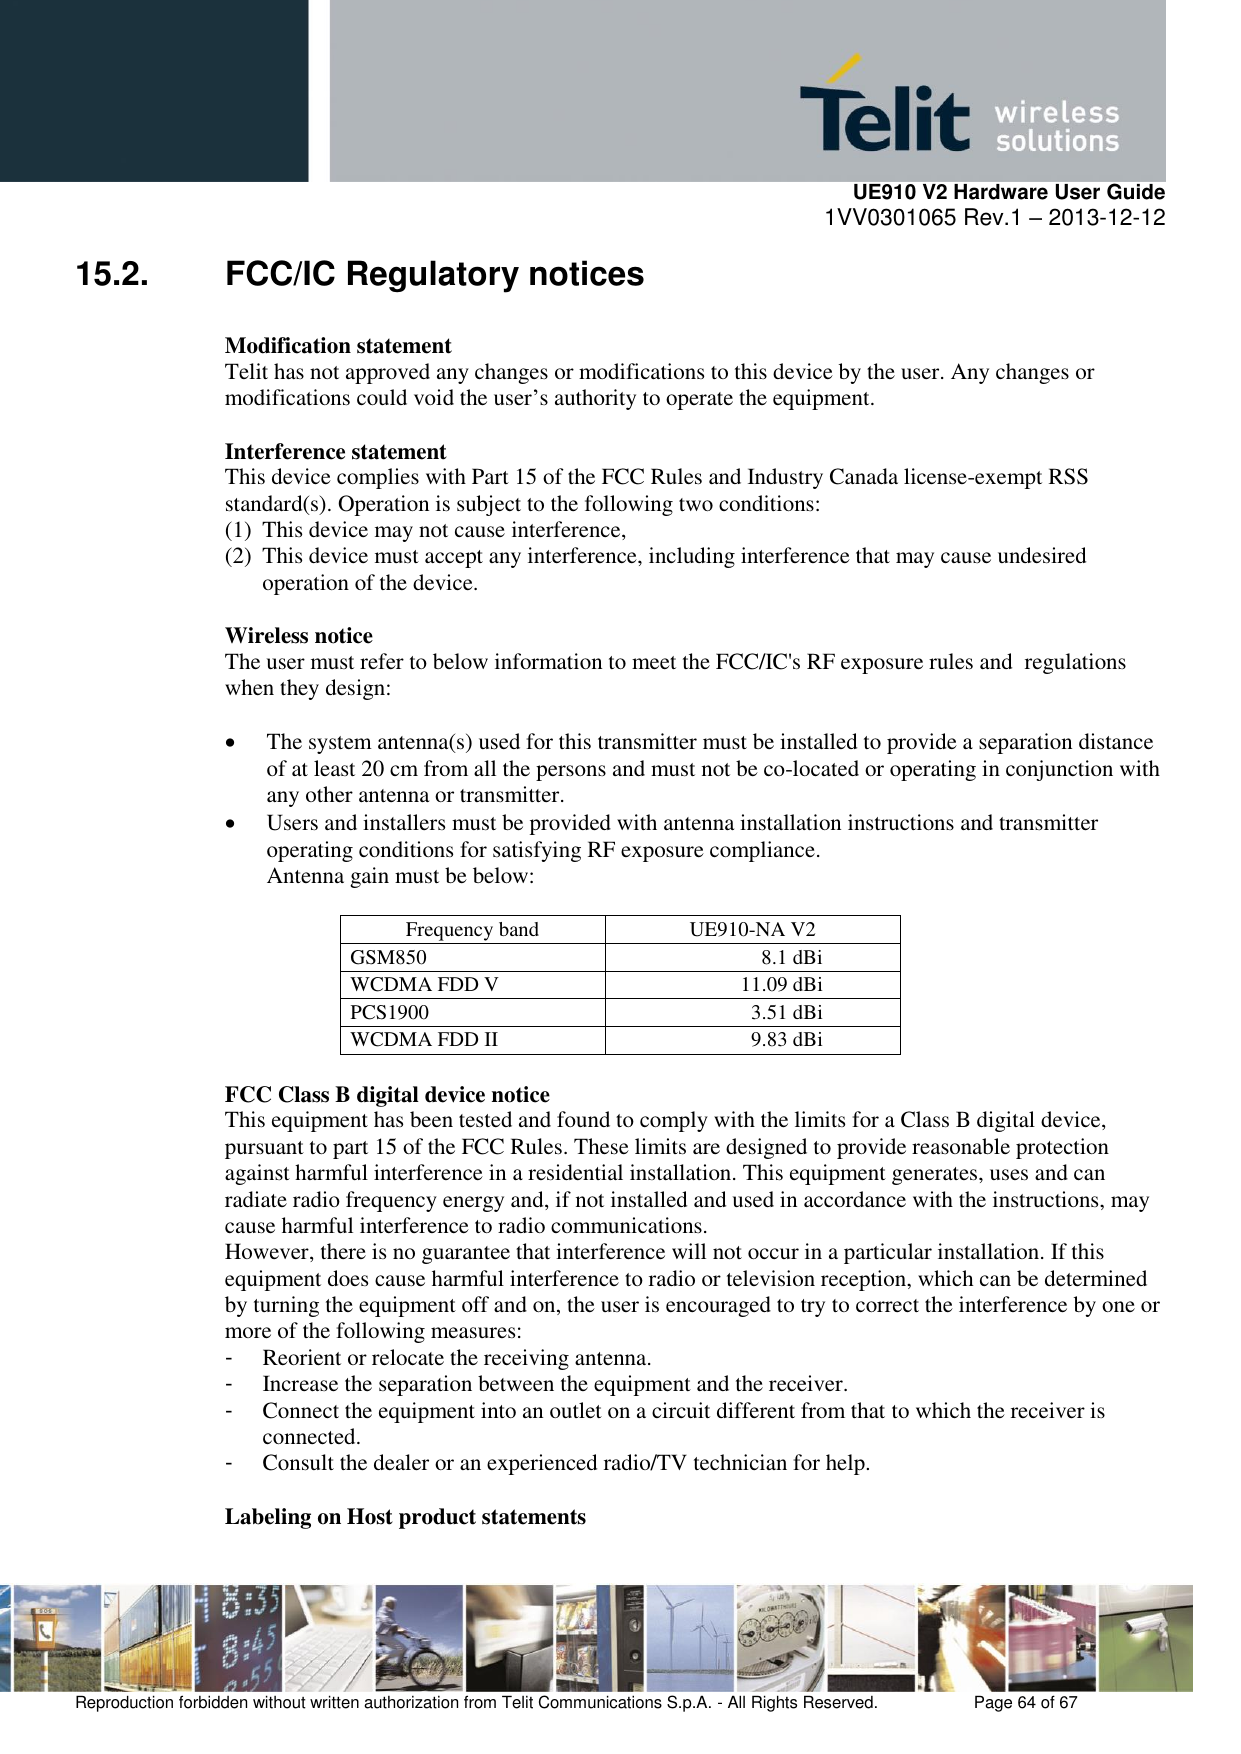     UE910 V2 Hardware User Guide 1VV0301065 Rev.1 – 2013-12-12  Reproduction forbidden without written authorization from Telit Communications S.p.A. - All Rights Reserved.    Page 64 of 67                                                     15.2.  FCC/IC Regulatory notices  Modification statement Telit has not approved any changes or modifications to this device by the user. Any changes or modifications could void the user’s authority to operate the equipment.  Interference statement This device complies with Part 15 of the FCC Rules and Industry Canada license-exempt RSS standard(s). Operation is subject to the following two conditions: (1) This device may not cause interference, (2) This device must accept any interference, including interference that may cause undesired operation of the device.  Wireless notice The user must refer to below information to meet the FCC/IC&apos;s RF exposure rules and  regulations when they design:   The system antenna(s) used for this transmitter must be installed to provide a separation distance of at least 20 cm from all the persons and must not be co-located or operating in conjunction with any other antenna or transmitter.  Users and installers must be provided with antenna installation instructions and transmitter operating conditions for satisfying RF exposure compliance. Antenna gain must be below:  Frequency band UE910-NA V2 GSM850 8.1 dBi WCDMA FDD V 11.09 dBi PCS1900 3.51 dBi WCDMA FDD II 9.83 dBi  FCC Class B digital device notice This equipment has been tested and found to comply with the limits for a Class B digital device, pursuant to part 15 of the FCC Rules. These limits are designed to provide reasonable protection against harmful interference in a residential installation. This equipment generates, uses and can radiate radio frequency energy and, if not installed and used in accordance with the instructions, may cause harmful interference to radio communications. However, there is no guarantee that interference will not occur in a particular installation. If this equipment does cause harmful interference to radio or television reception, which can be determined by turning the equipment off and on, the user is encouraged to try to correct the interference by one or more of the following measures: -  Reorient or relocate the receiving antenna. -  Increase the separation between the equipment and the receiver. -  Connect the equipment into an outlet on a circuit different from that to which the receiver is connected. -  Consult the dealer or an experienced radio/TV technician for help.  Labeling on Host product statements 